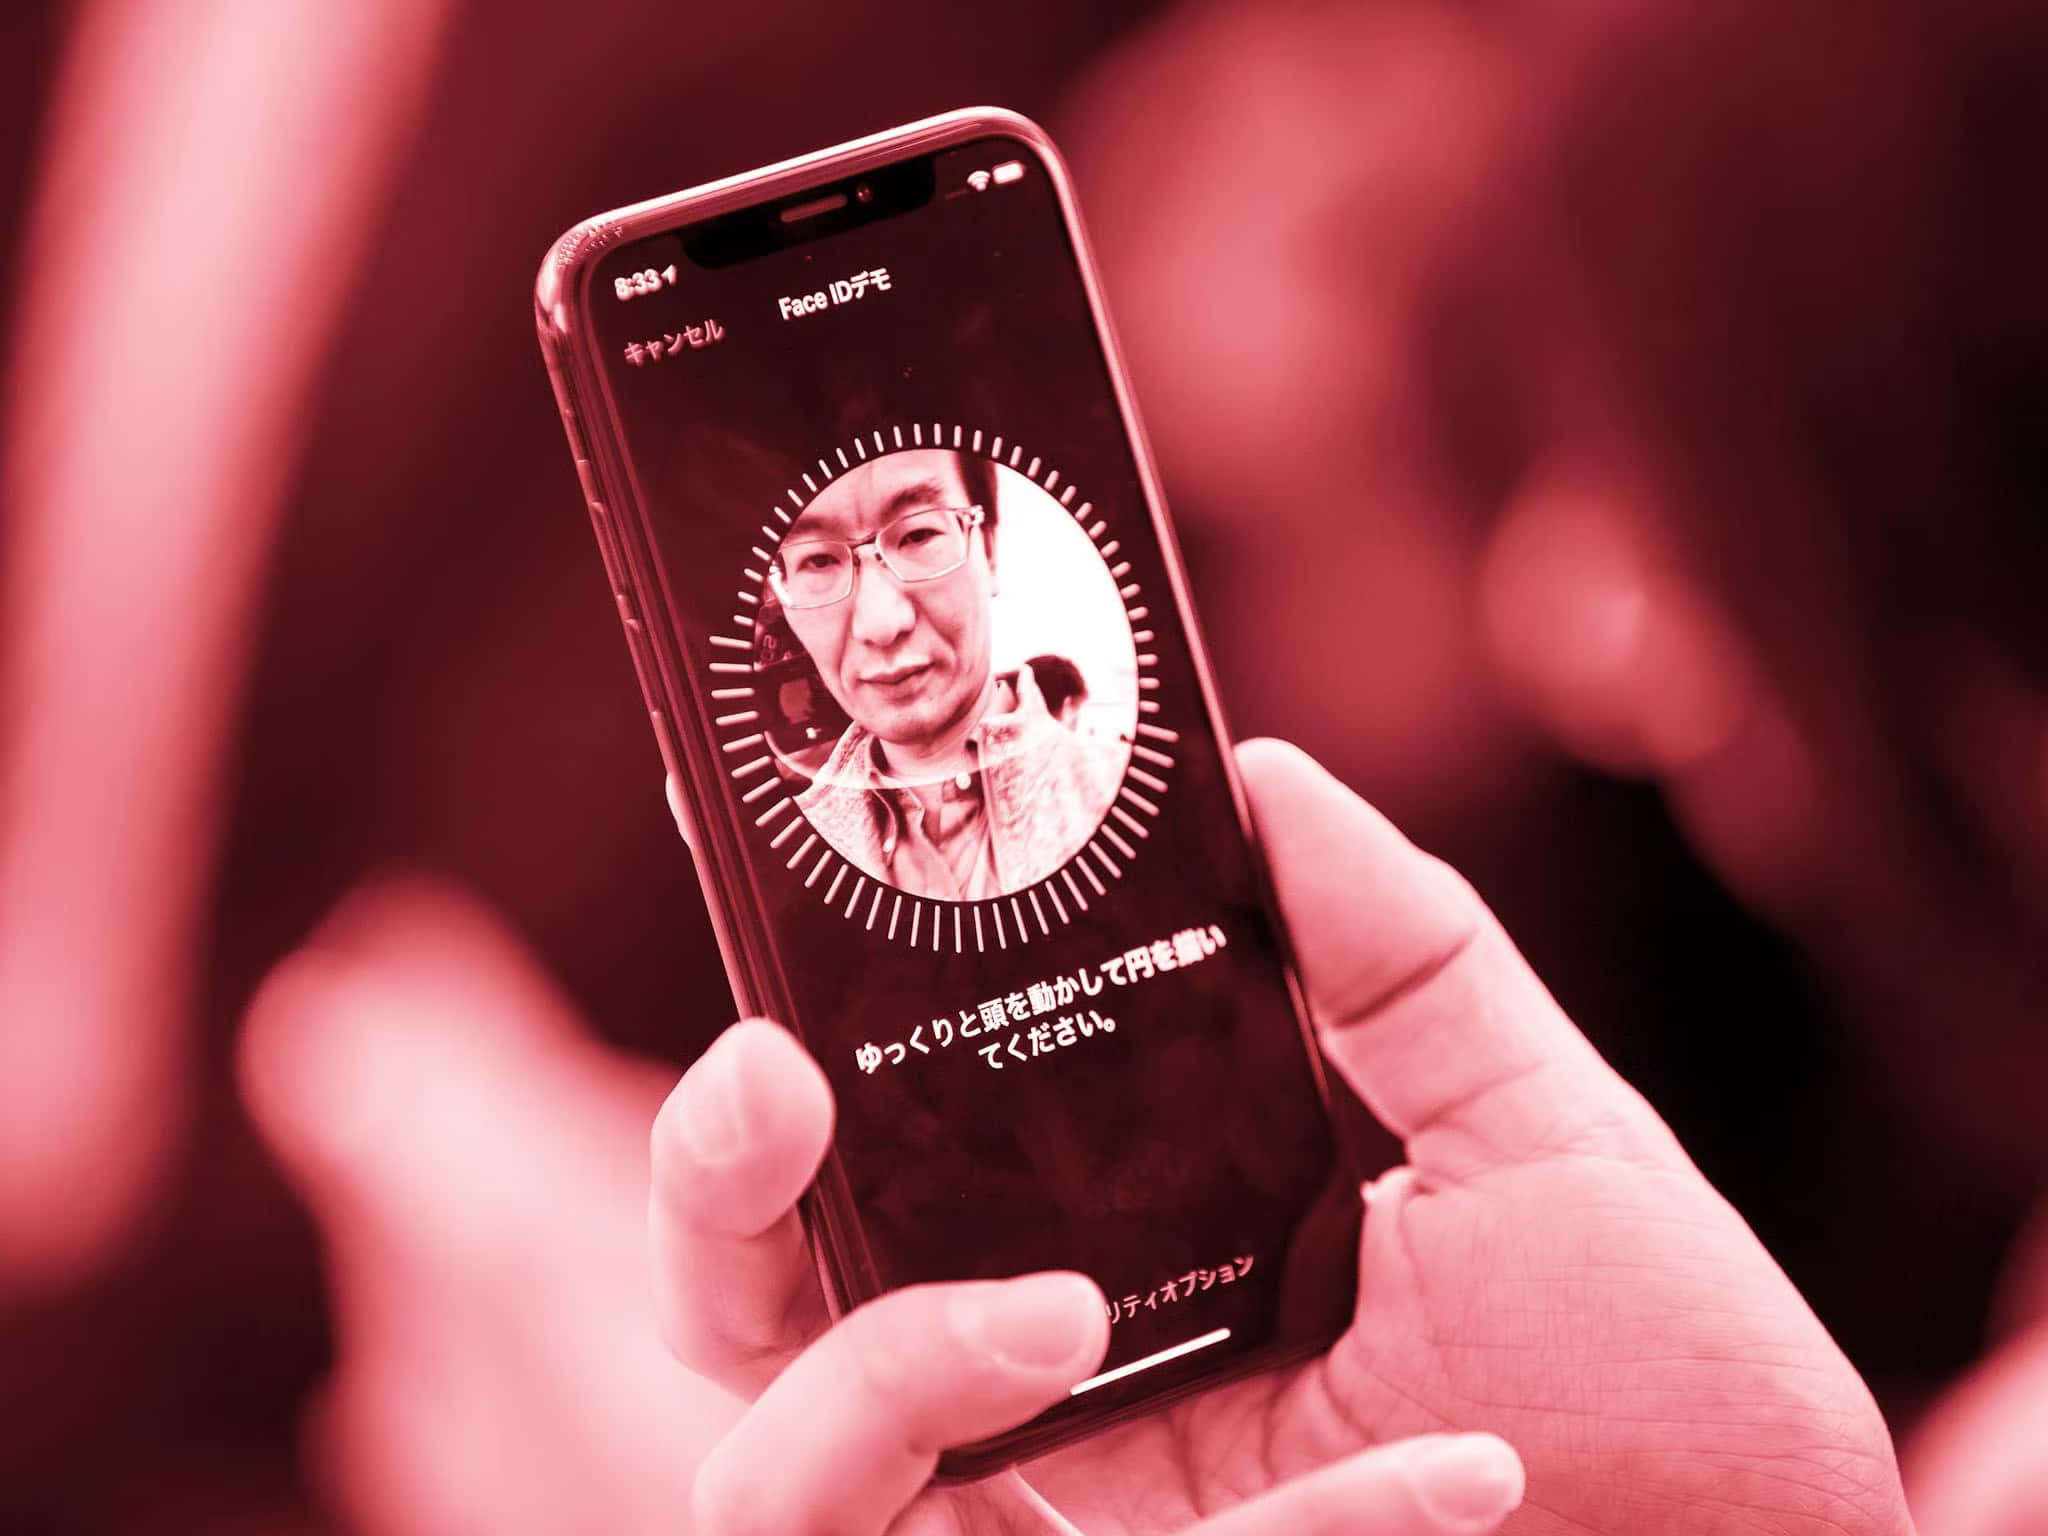 Say hello to the future of security - Face ID Wallpaper